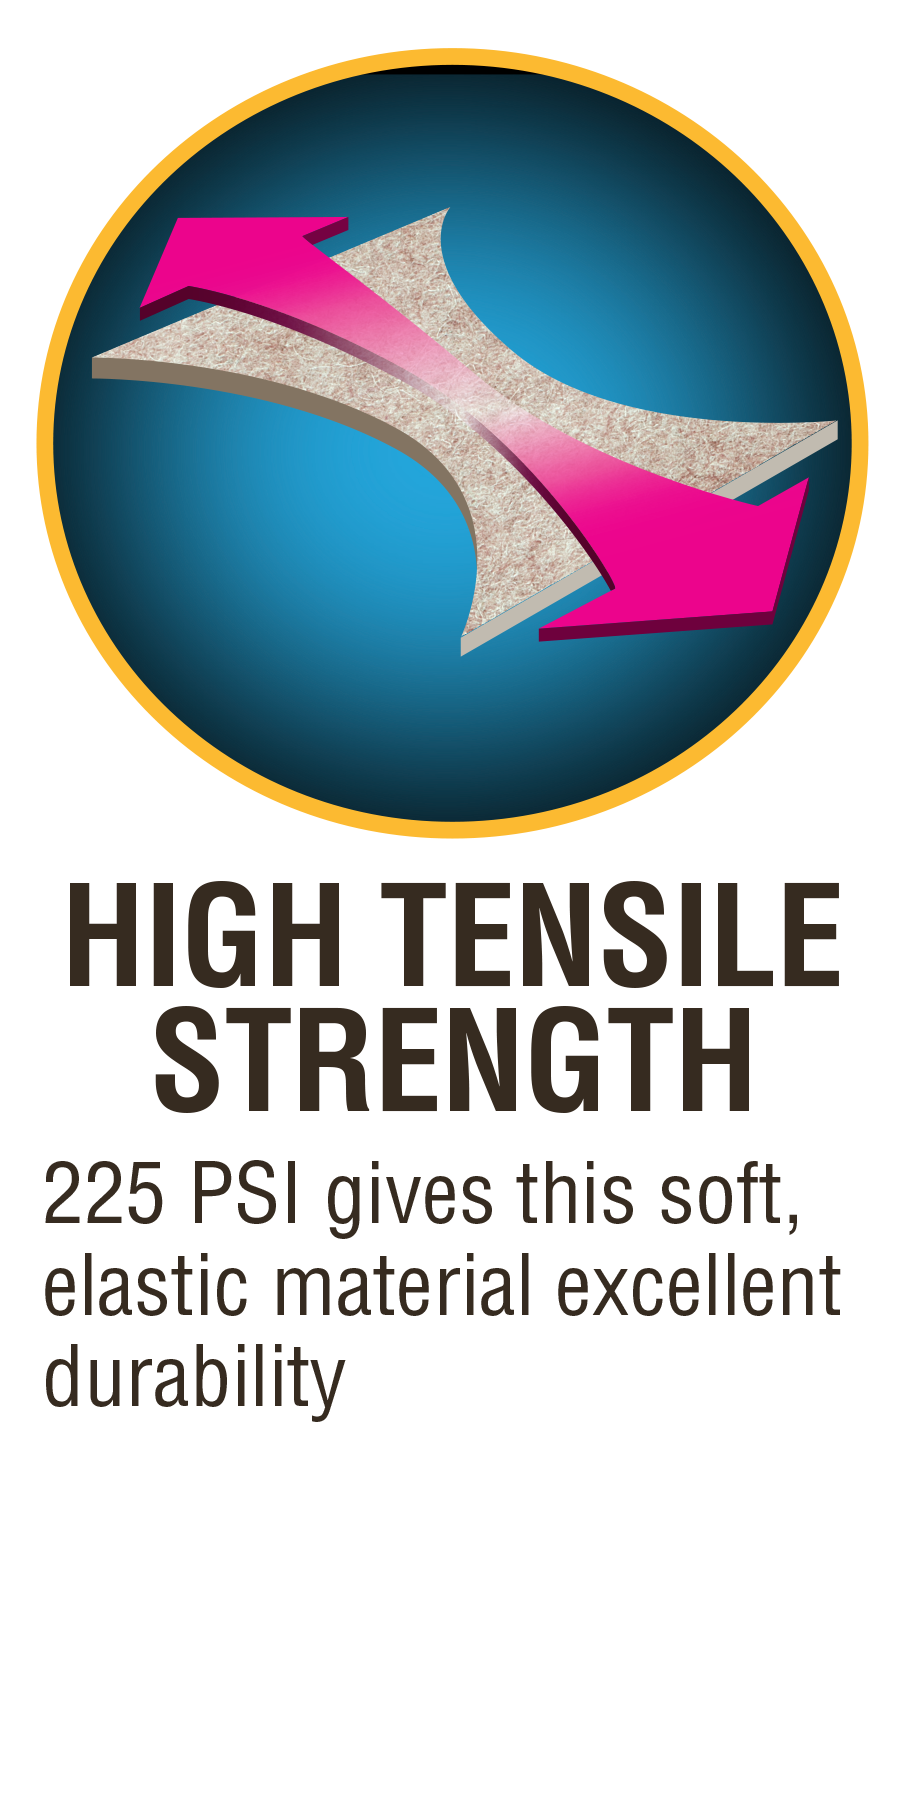 High Tensile Strength 225 PSI gives this soft elastic material excellent durability